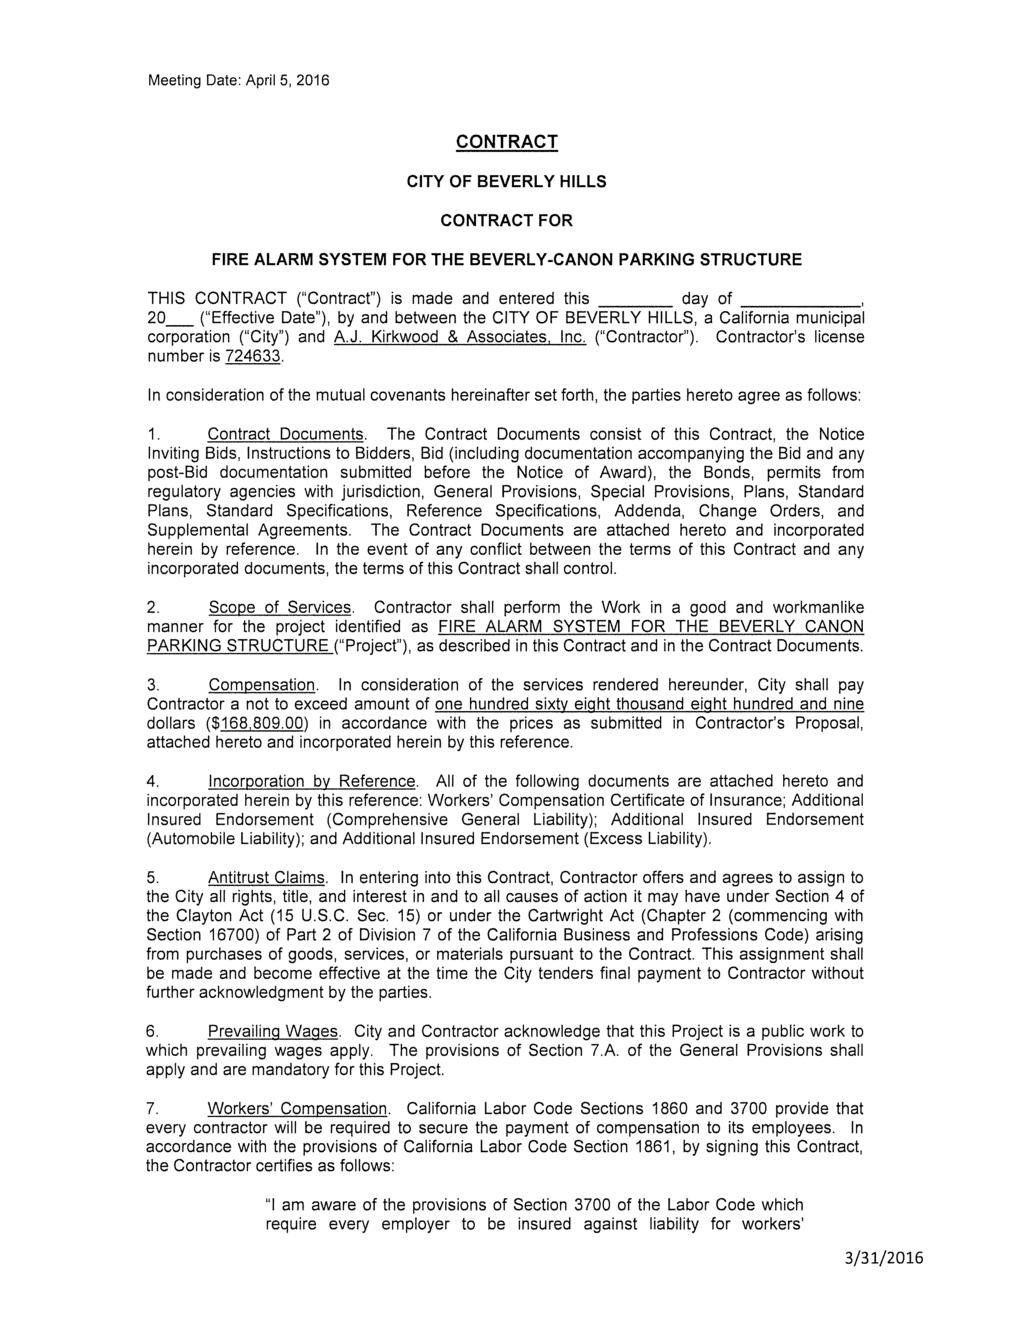 CONTRACT CITY OF BEVERLY HILLS CONTRACT FOR FIRE ALARM SYSTEM FOR THE BEVERLY-CANON PARKING STRUCTURE THIS CONTRACT ( Contract ) is made and entered this day of 20_ ( Effective Date ), by and between